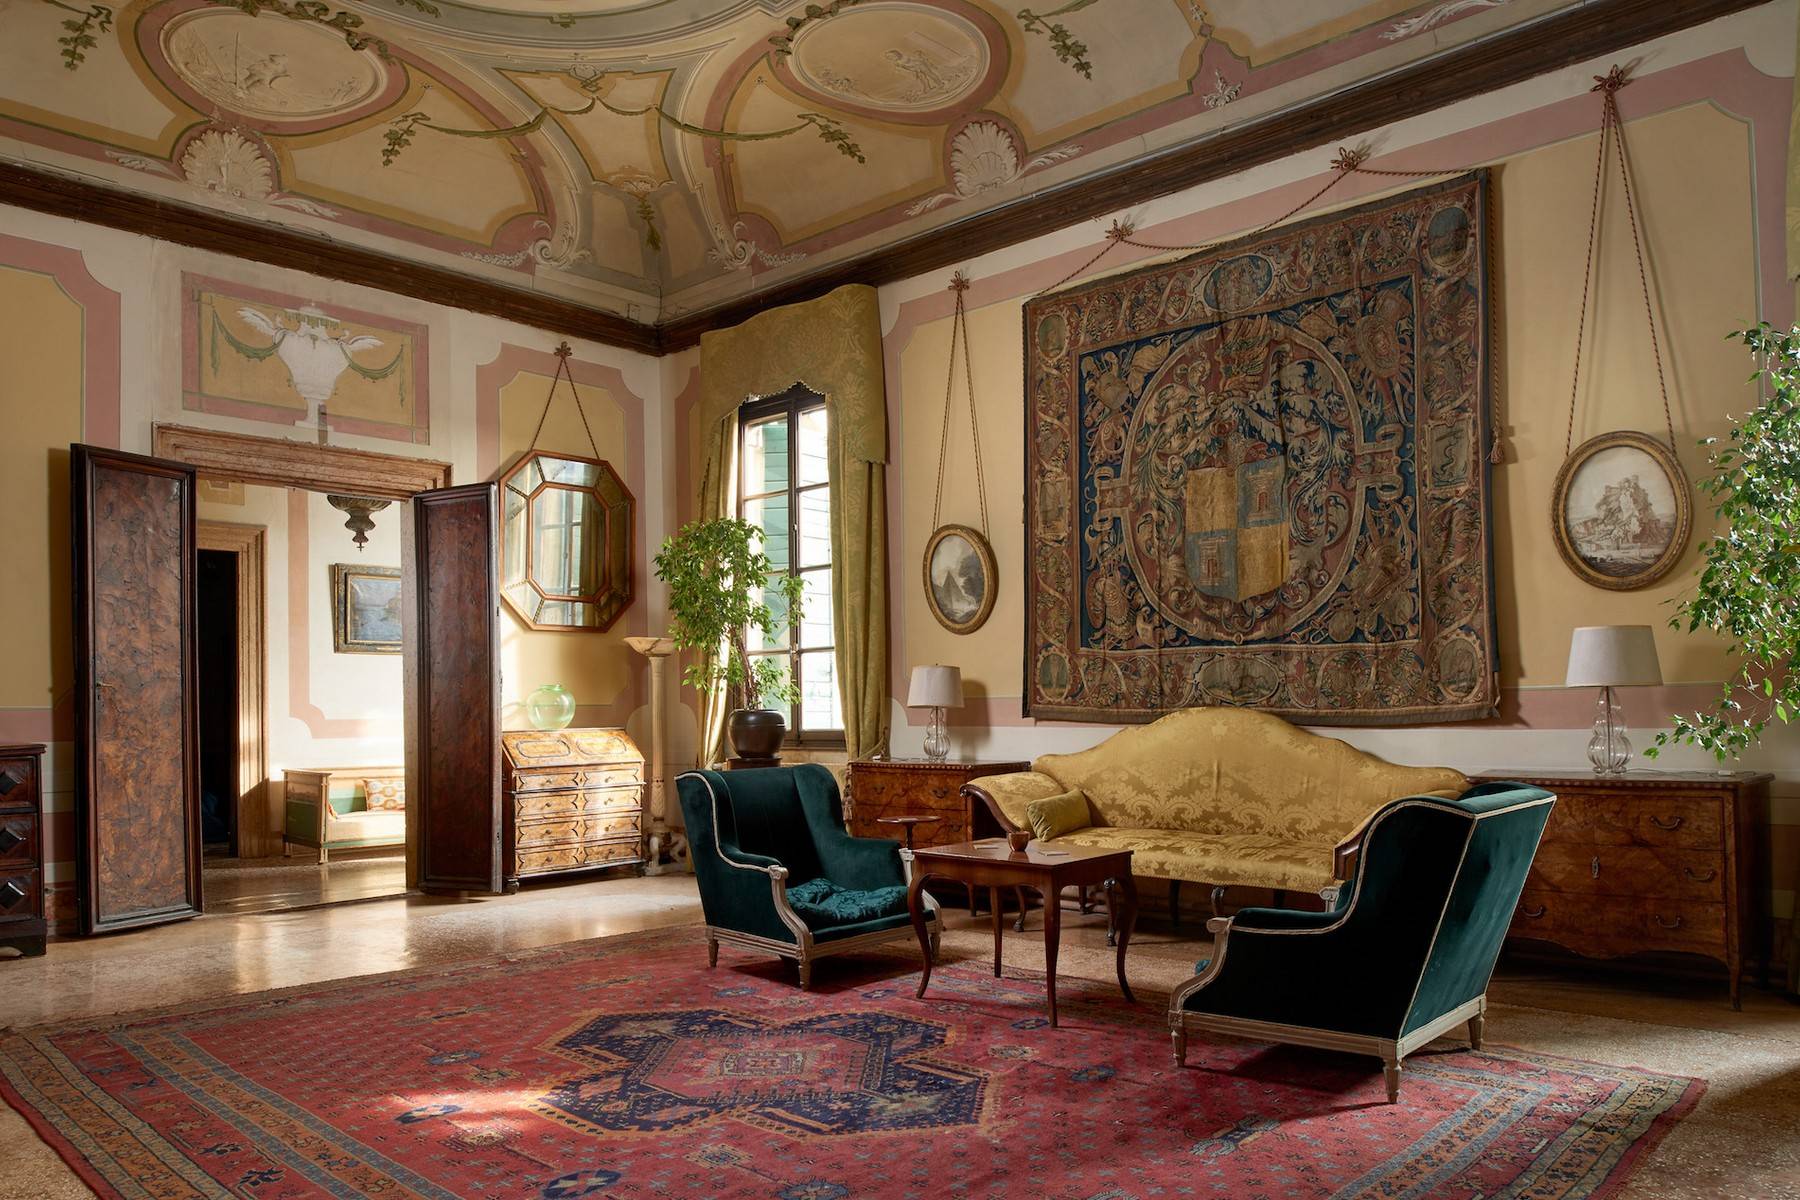 Stunning apartment in the Art Gallery district of Venice - 8